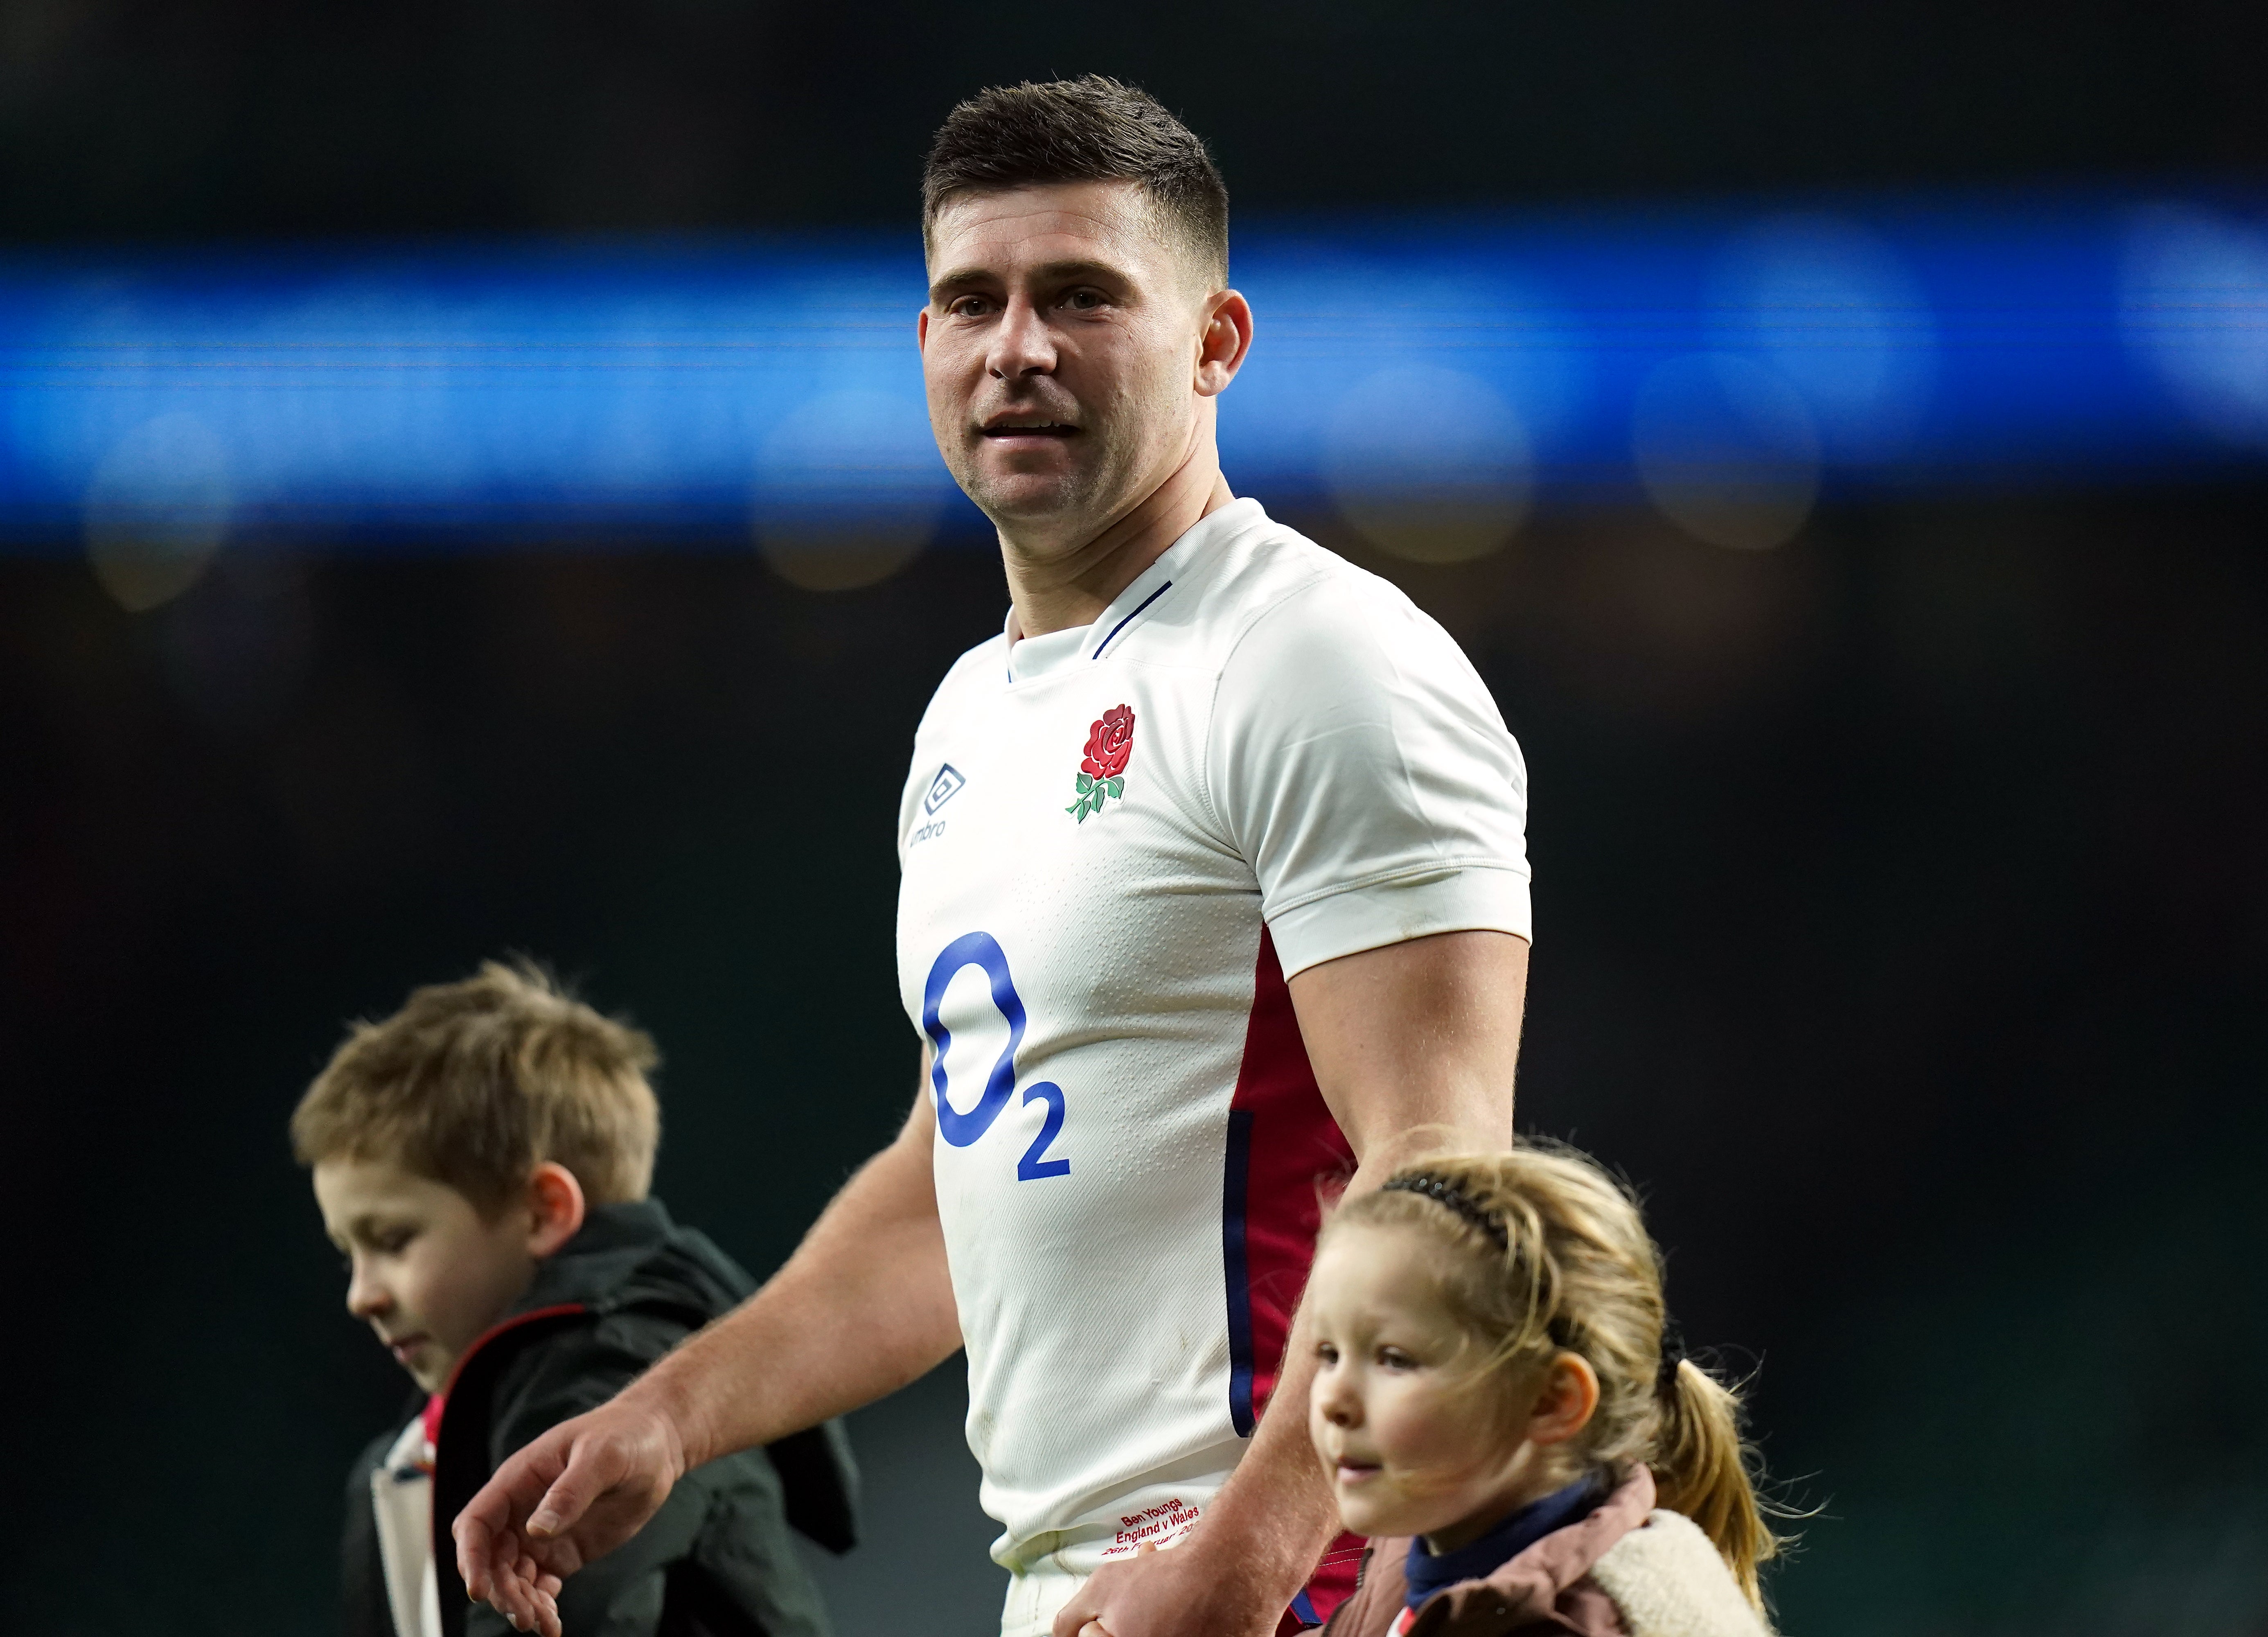 Ben Youngs became England’s most-capped player